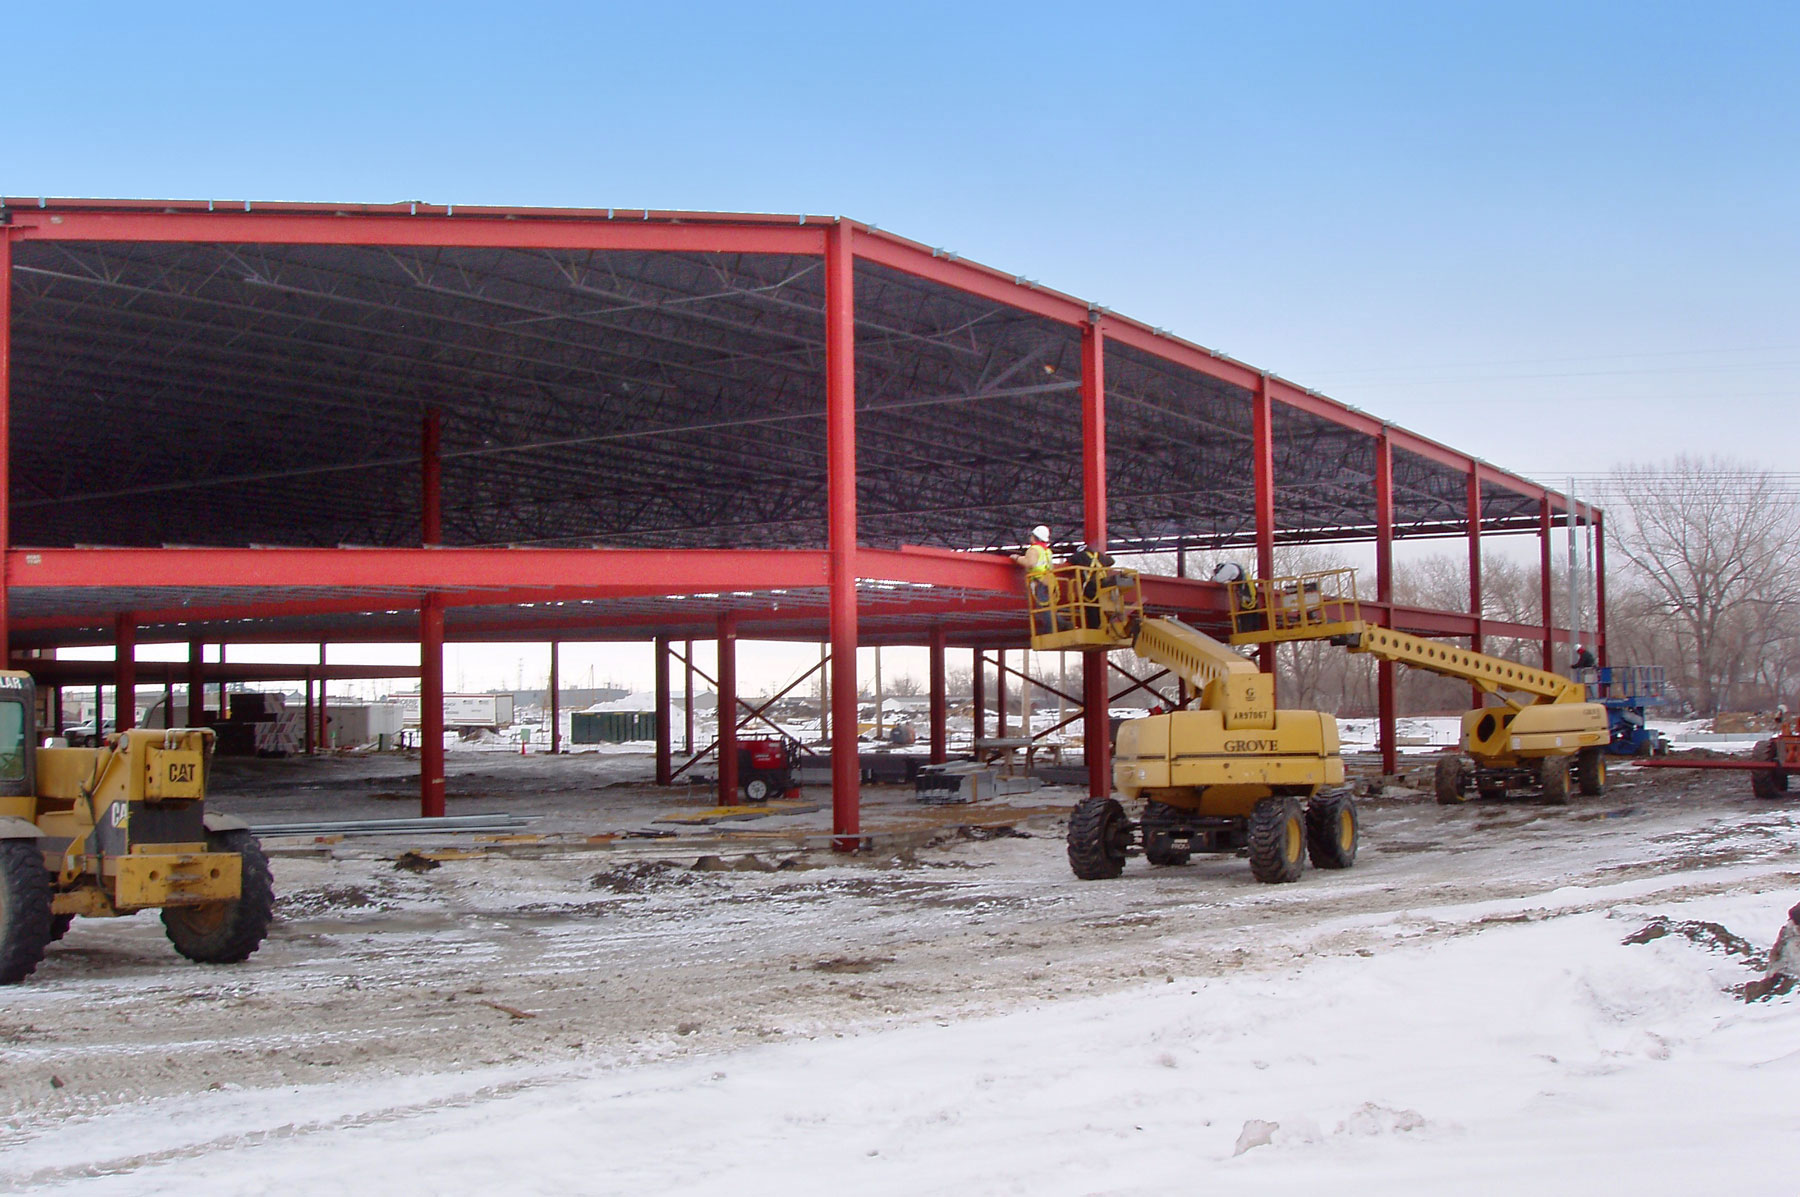 Conventional steel-framed structures